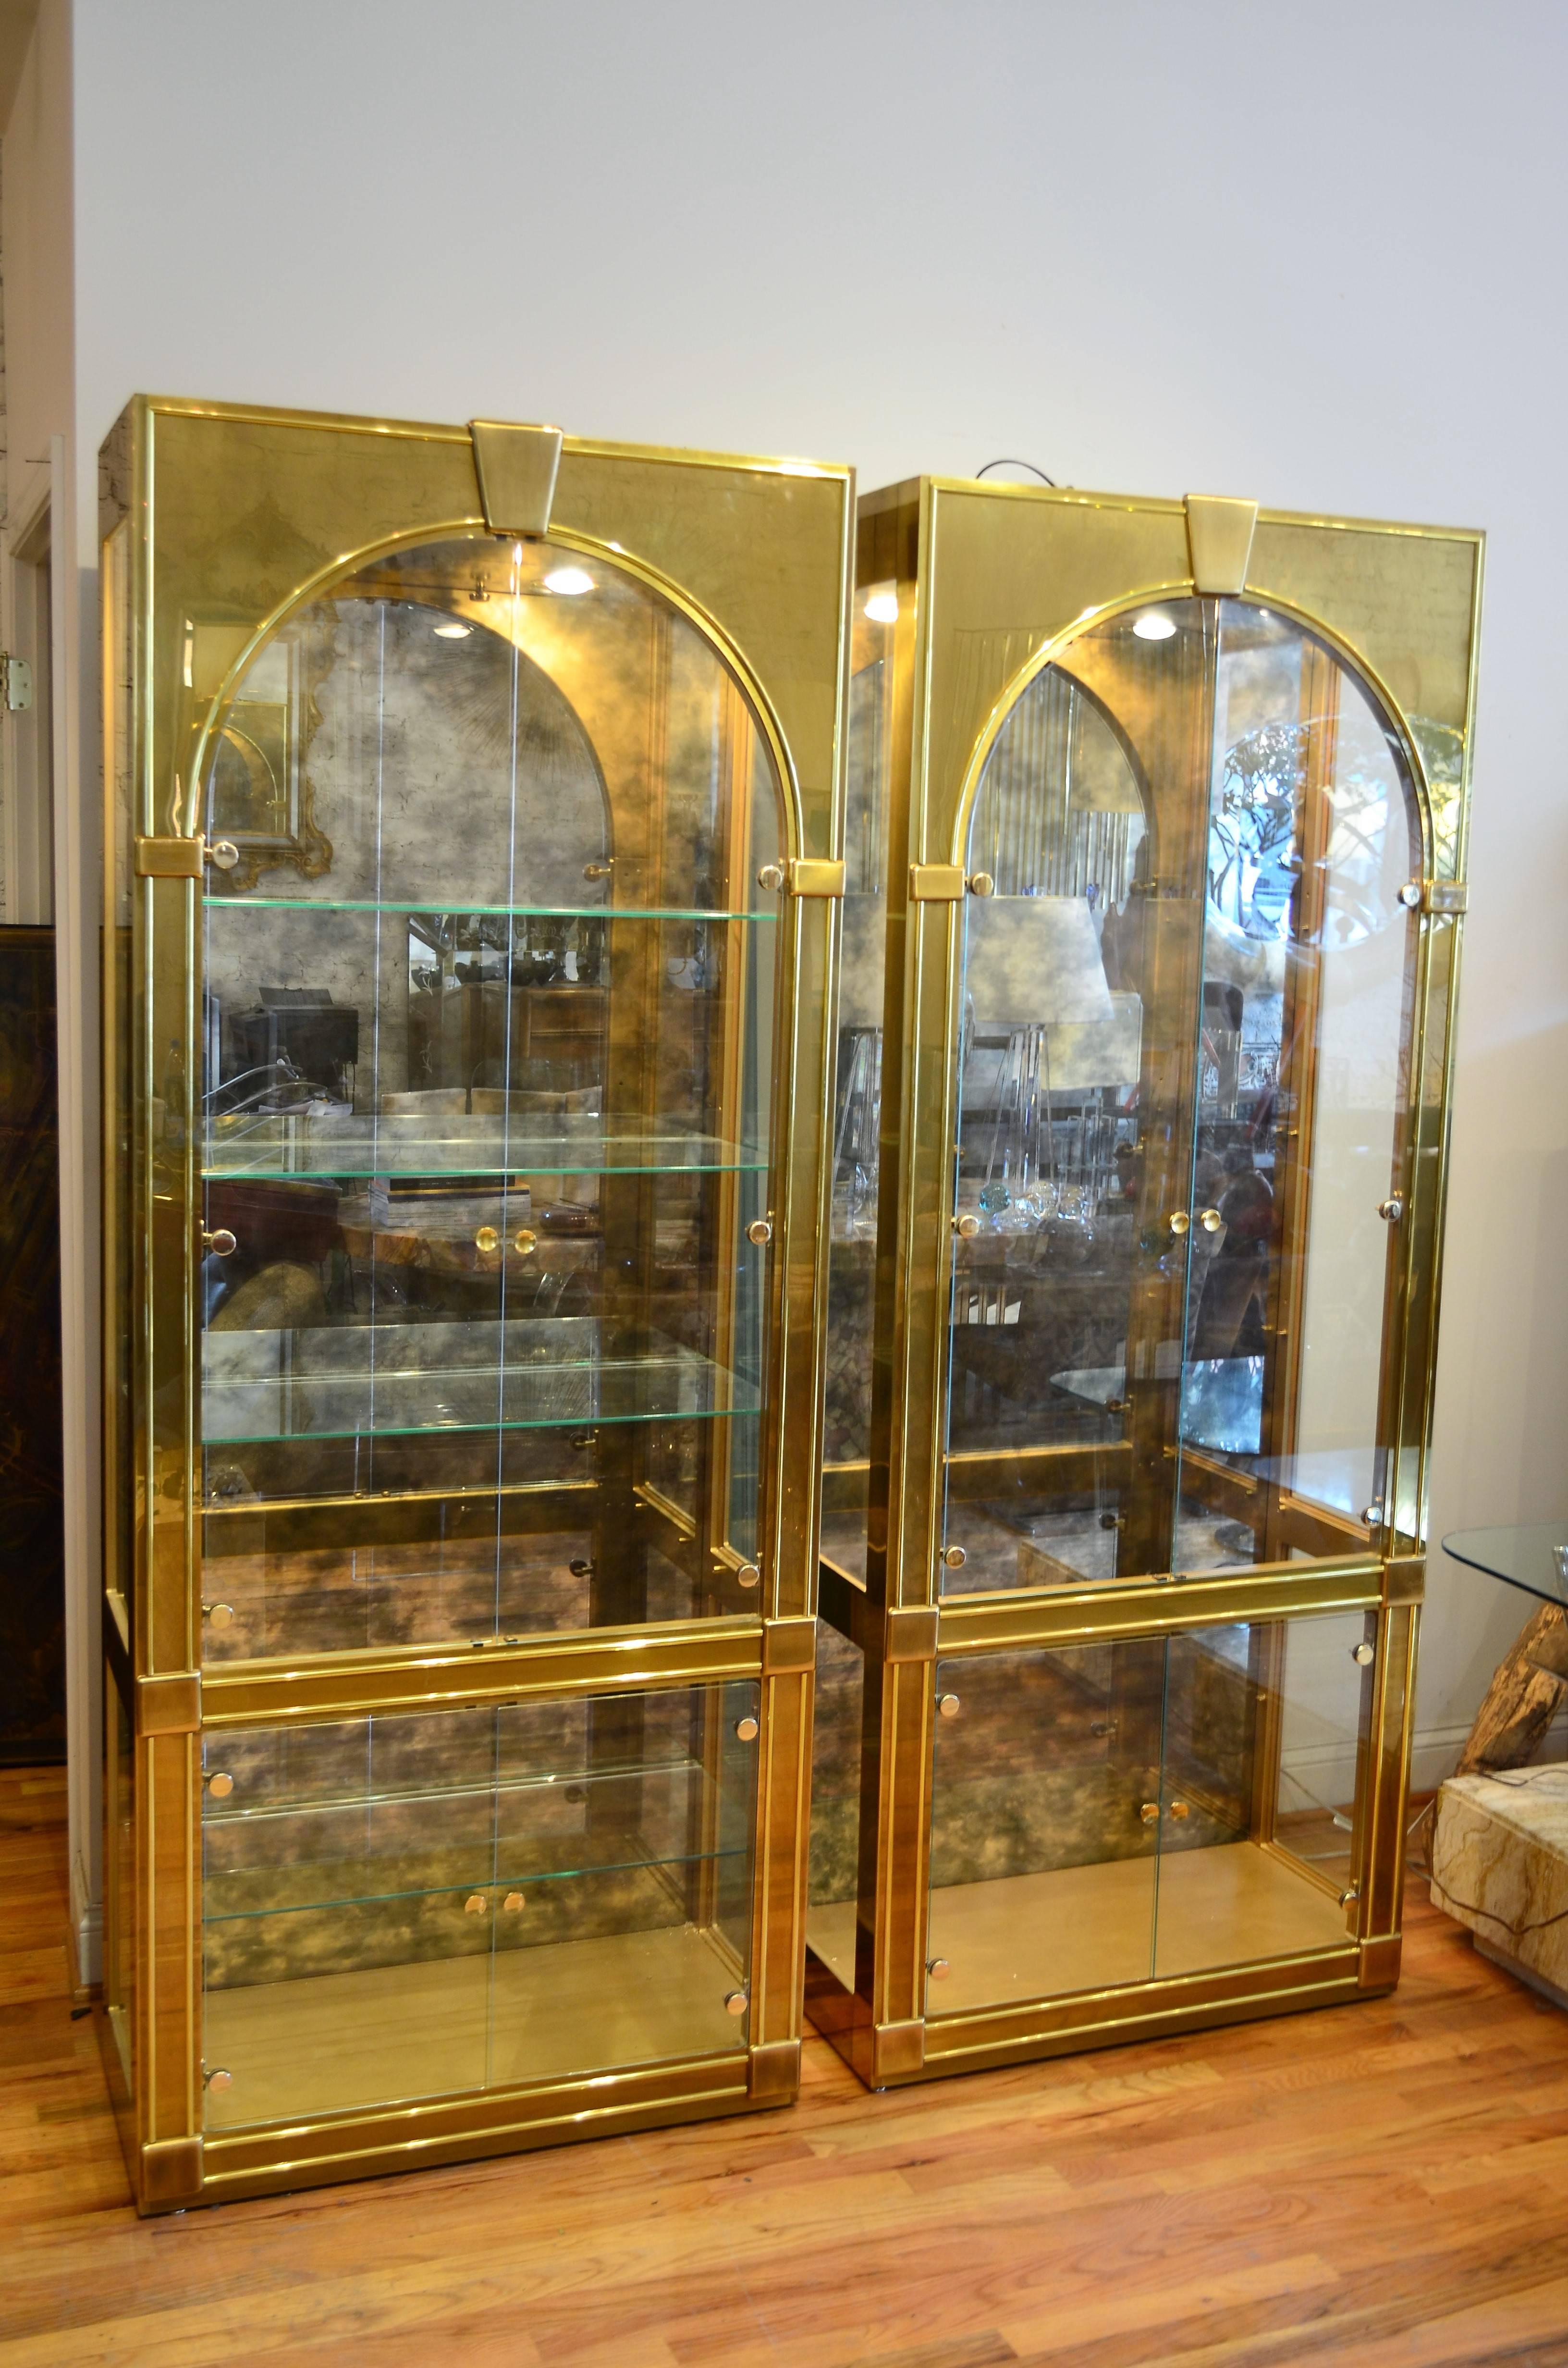 Pair of brass Mastercraft Palladian style vitrines with antiqued smoked mirrors backs.
Each cabinet is lite by two dimmer controlled interior lights
and has five adjustable glass shelves .